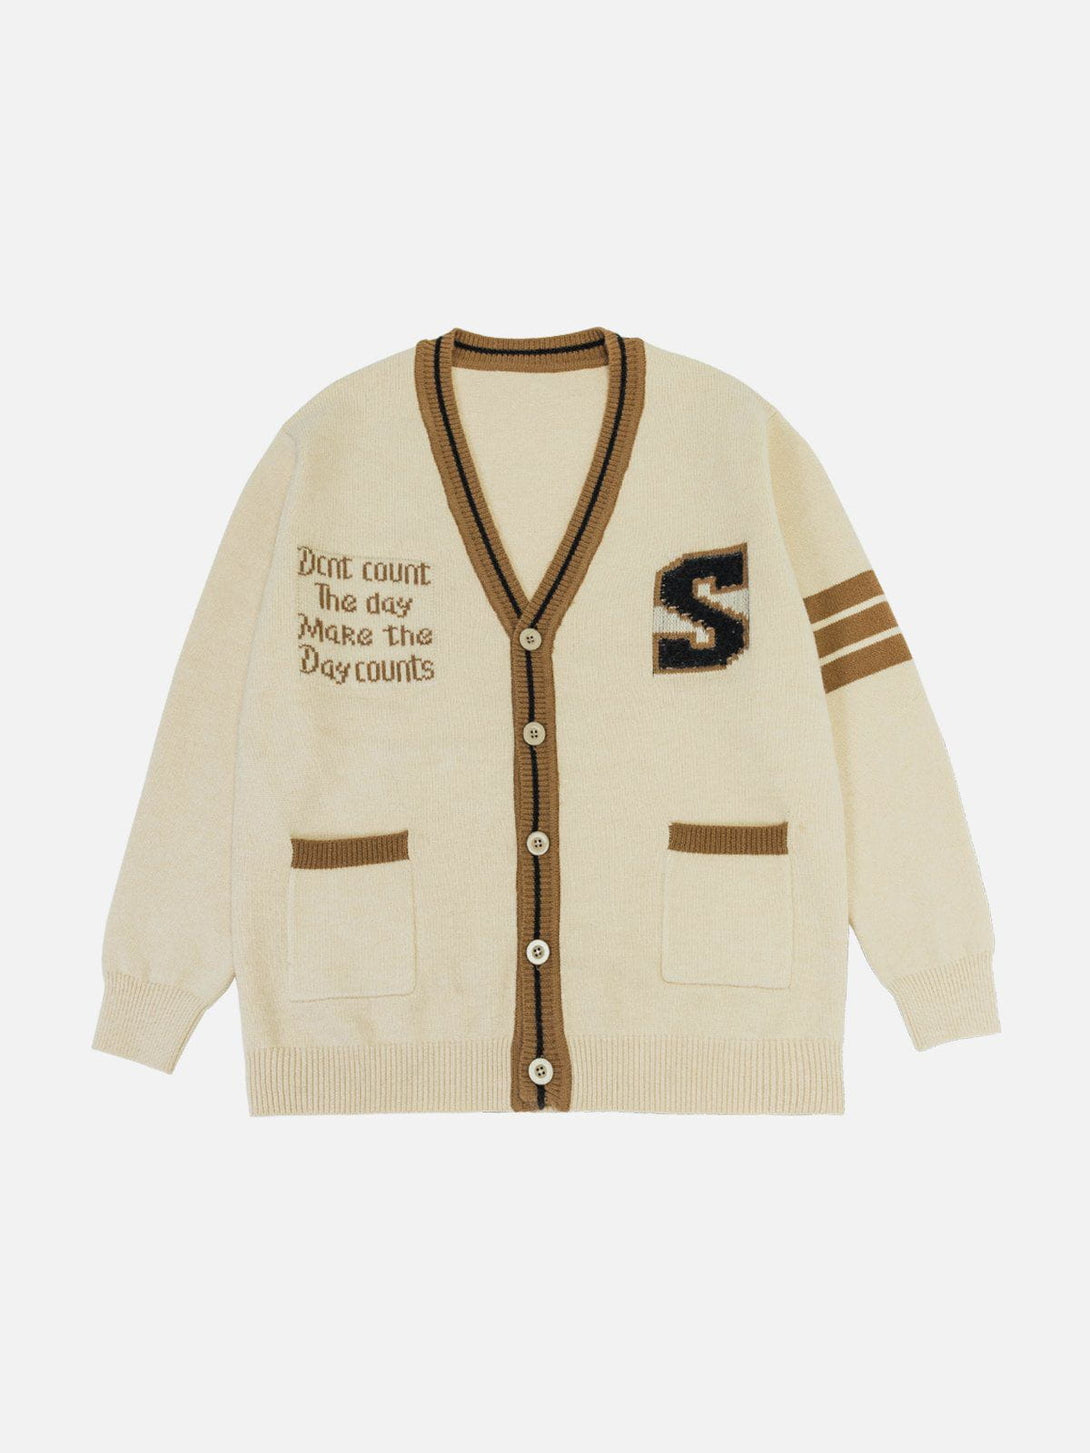 Levefly - "S" Embroidery Color Matching Cardigan - Streetwear Fashion - levefly.com